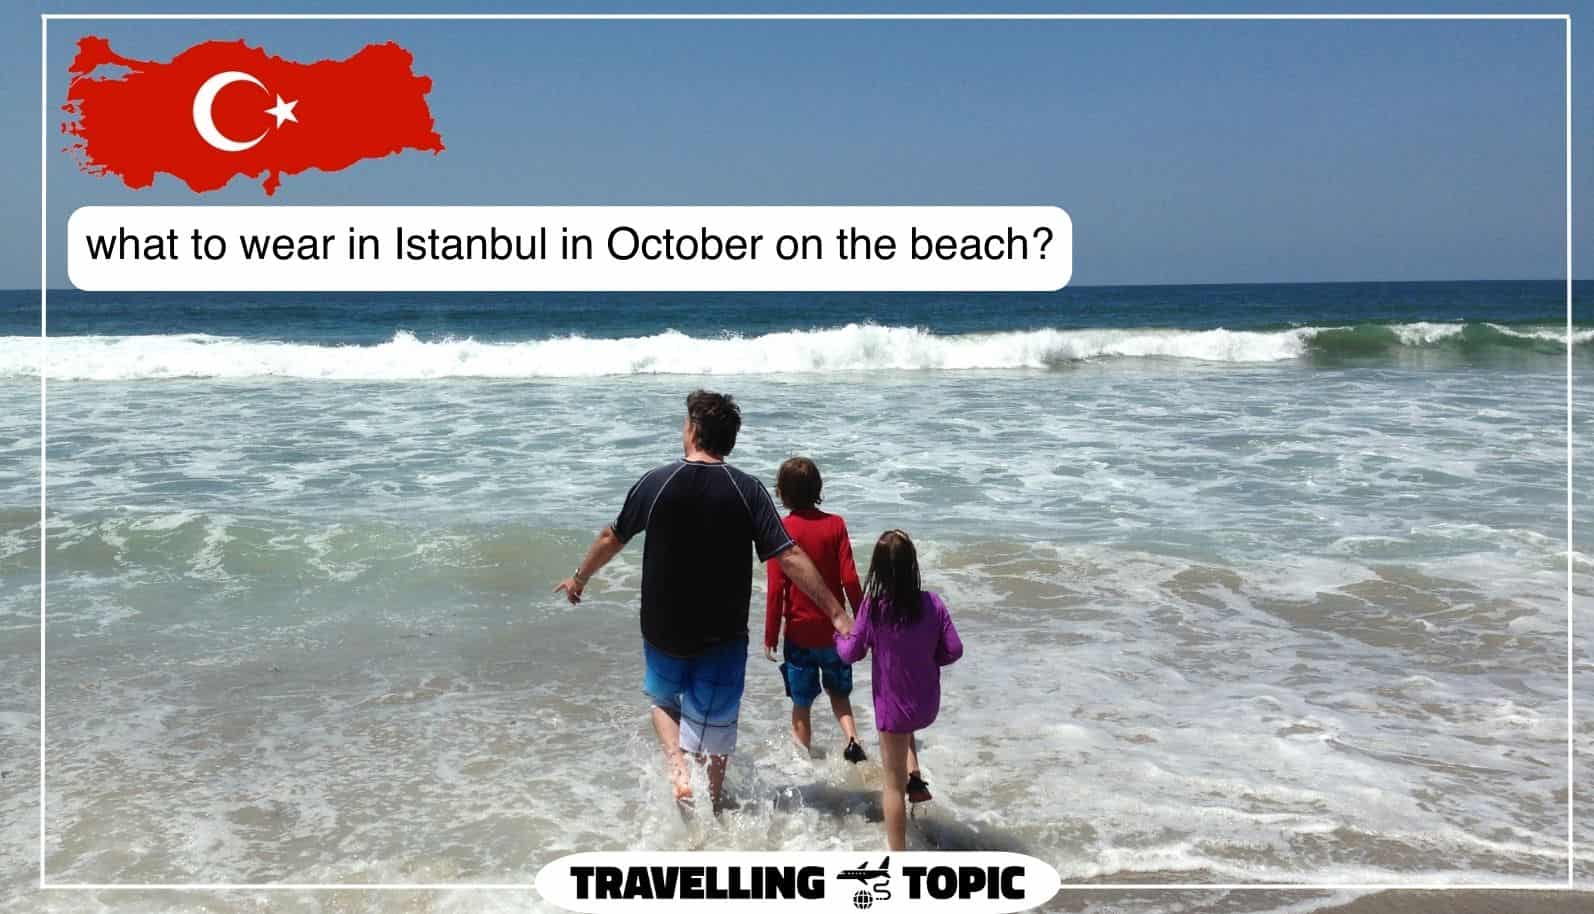 what to wear in Istanbul in October on the beach